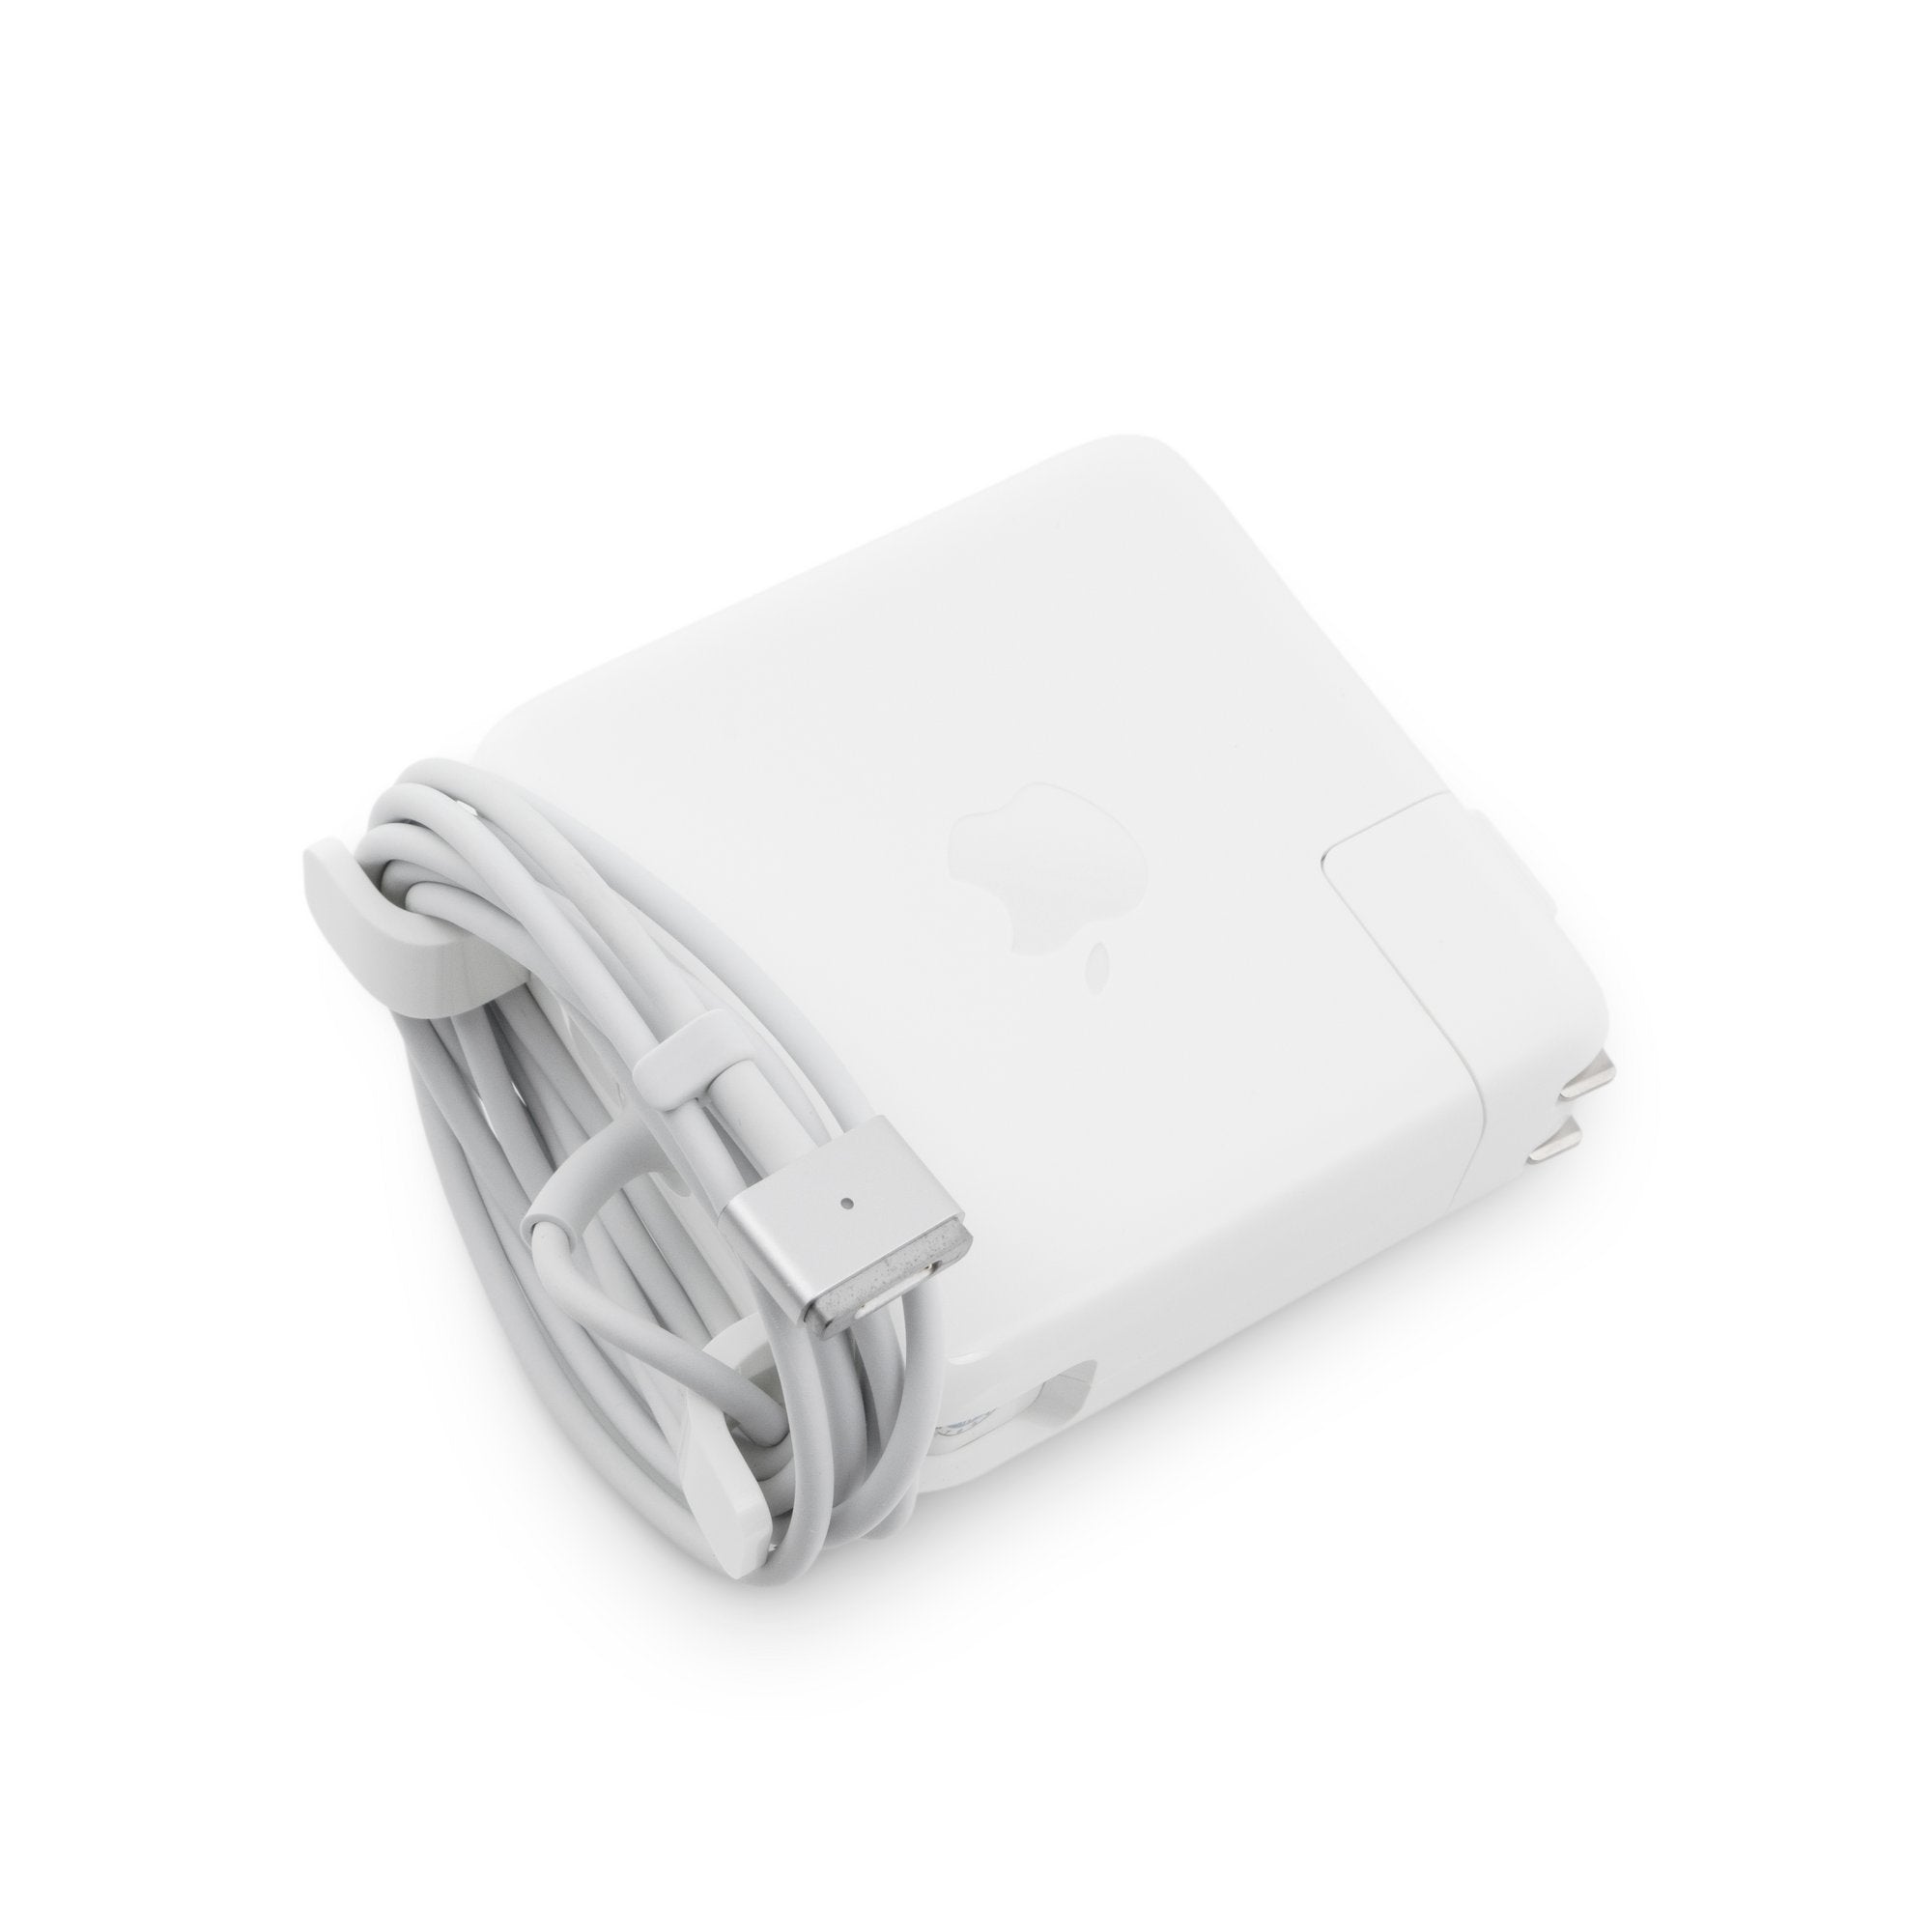 Apple 2 AC MacBook Charger iFixit